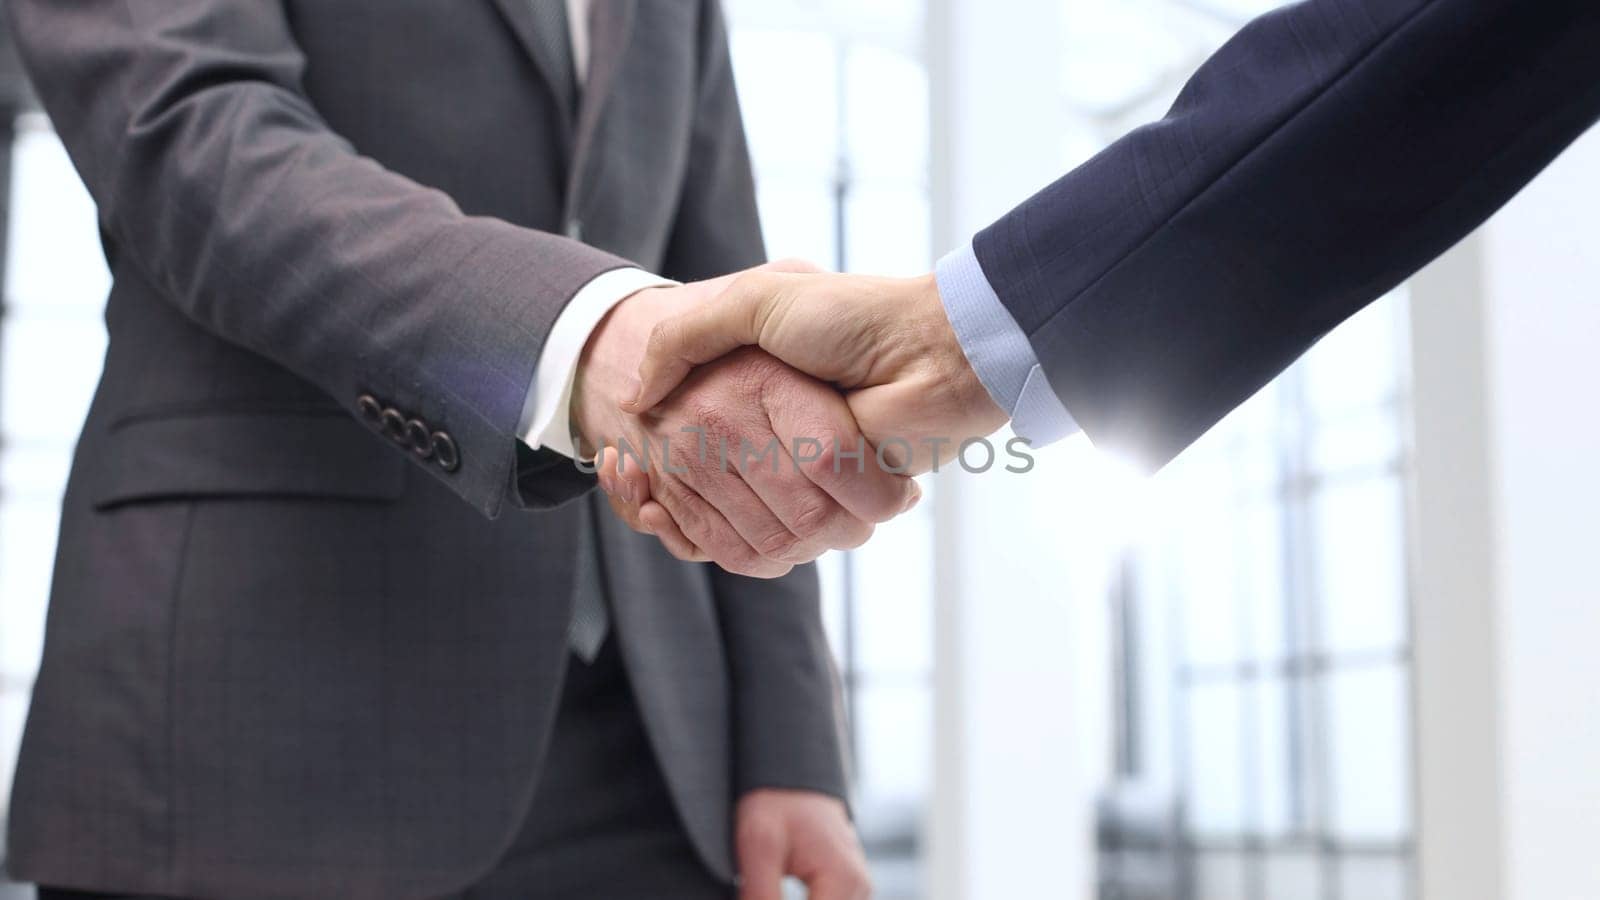 Handshake, agreement after the transaction.